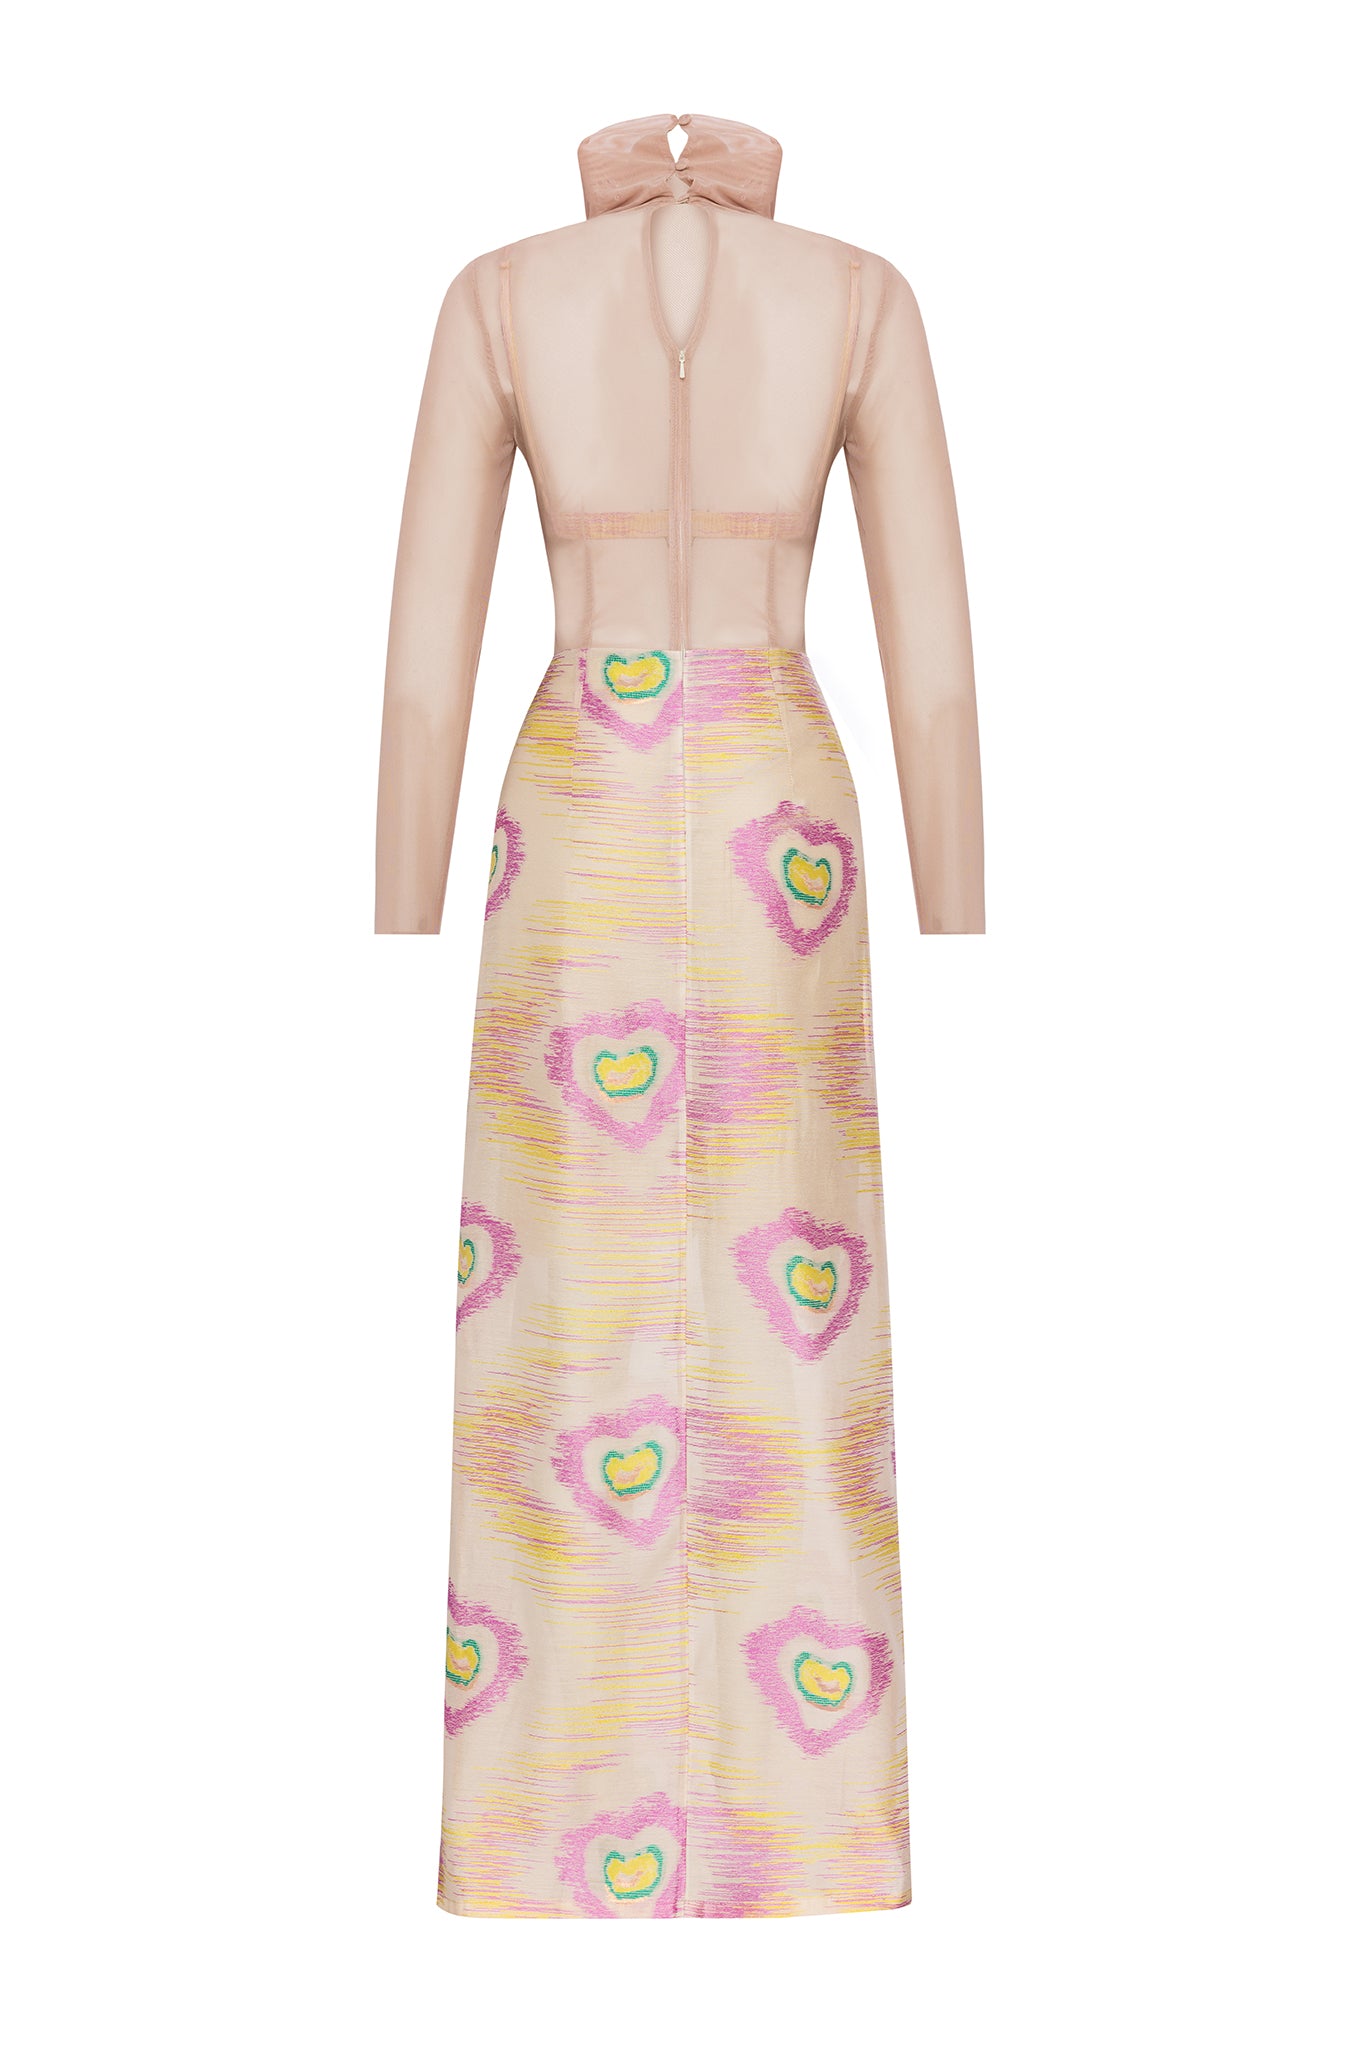 NAZAR IKAT DRESS WITH TULLE LAYER